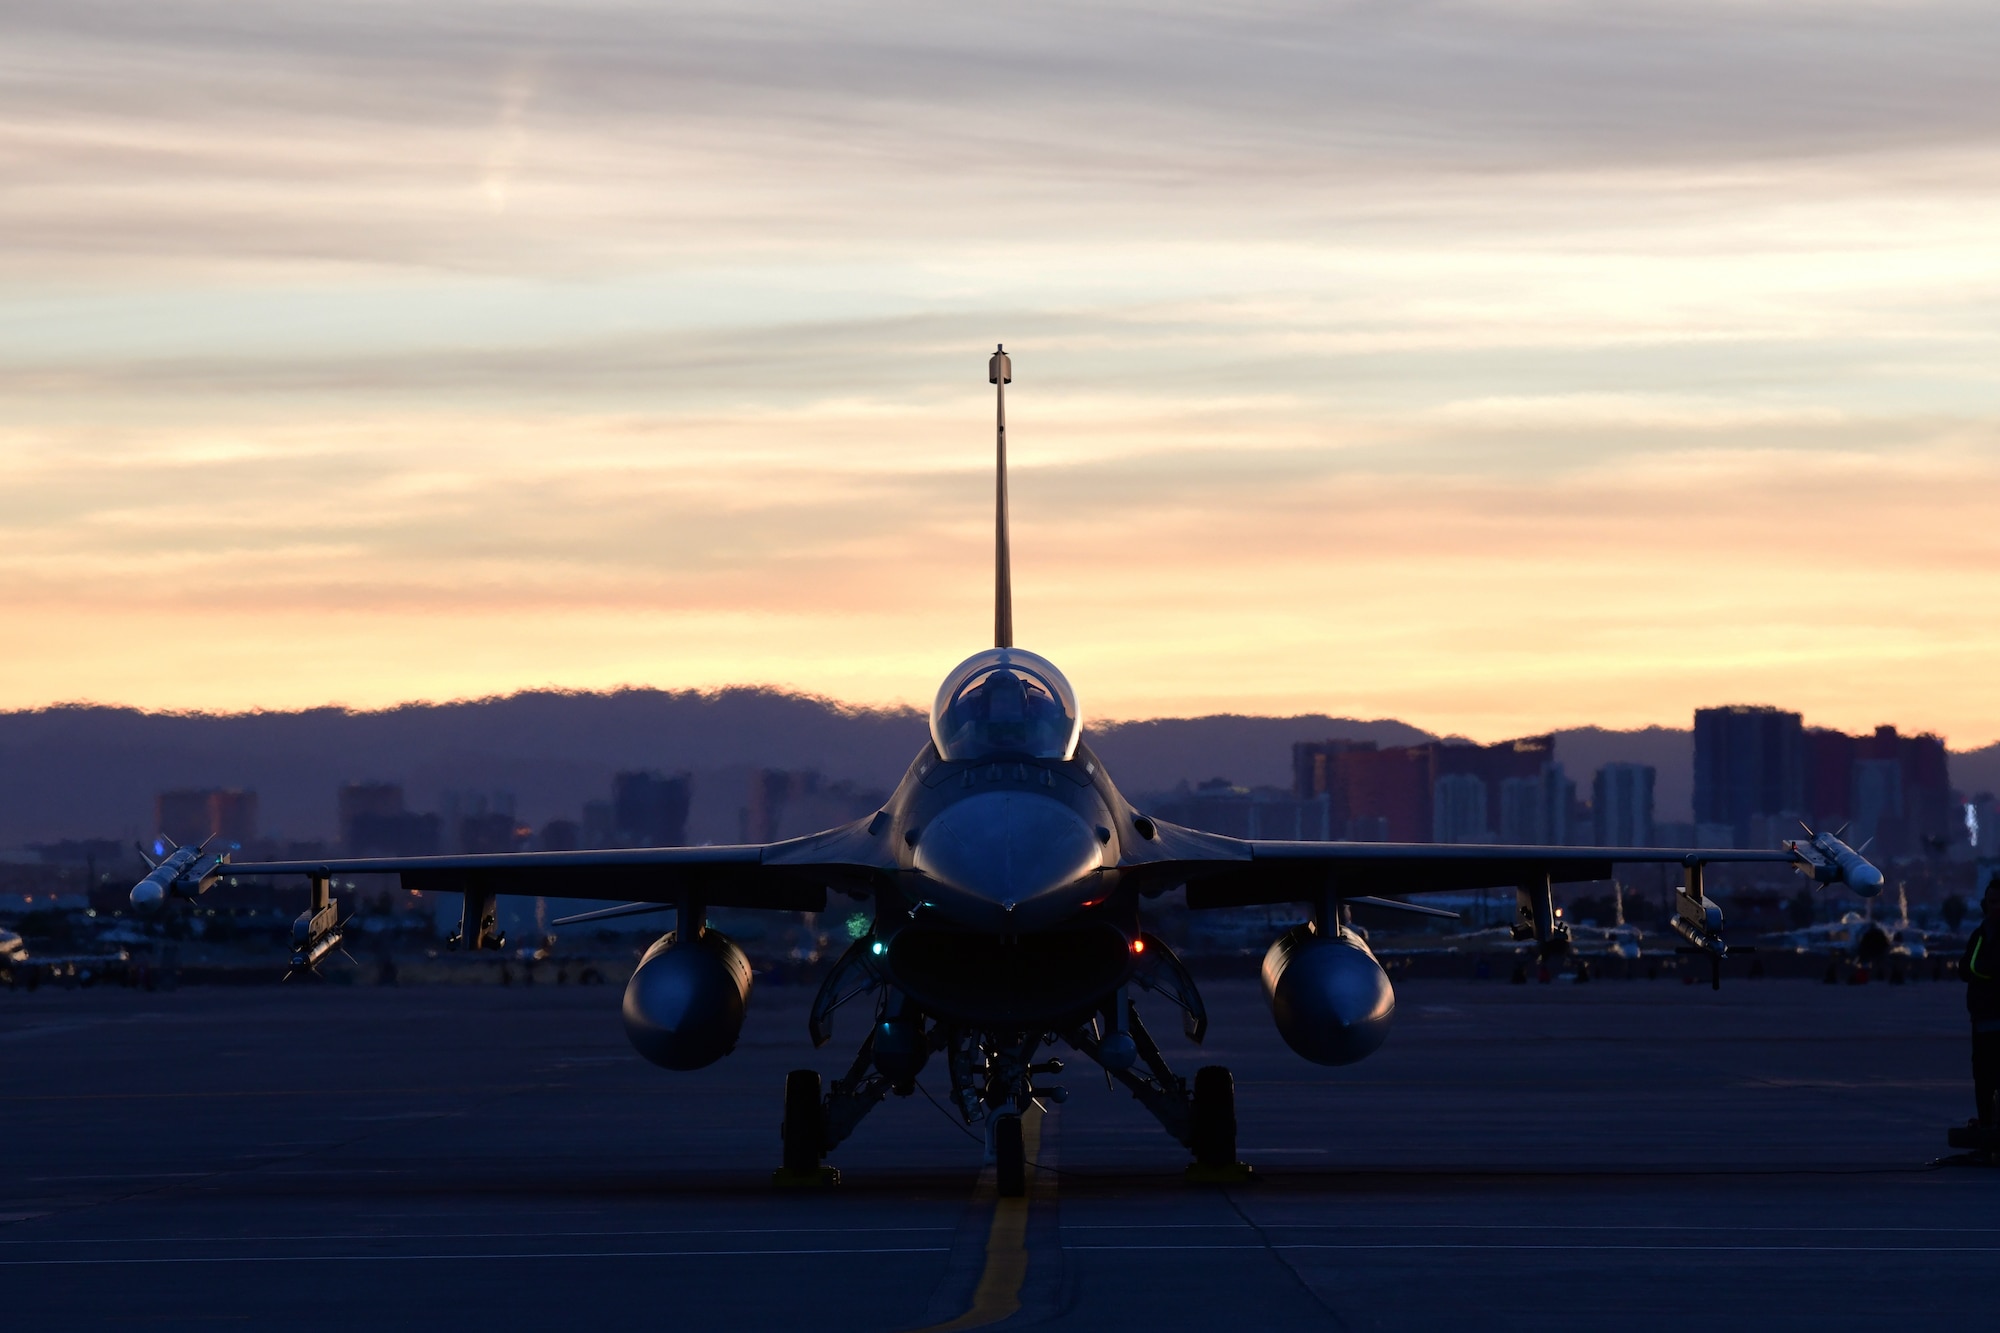 A combined active duty and reserve mix of 84th TES, 85th TES, and 422nd TES pilots conduct Force Development Evaluations of multiple systems on the F-16, Dec. 15, at Nellis Air Force Base, Nev. (U.S. Air Force Photo by Maj. Mike Giaquinto)